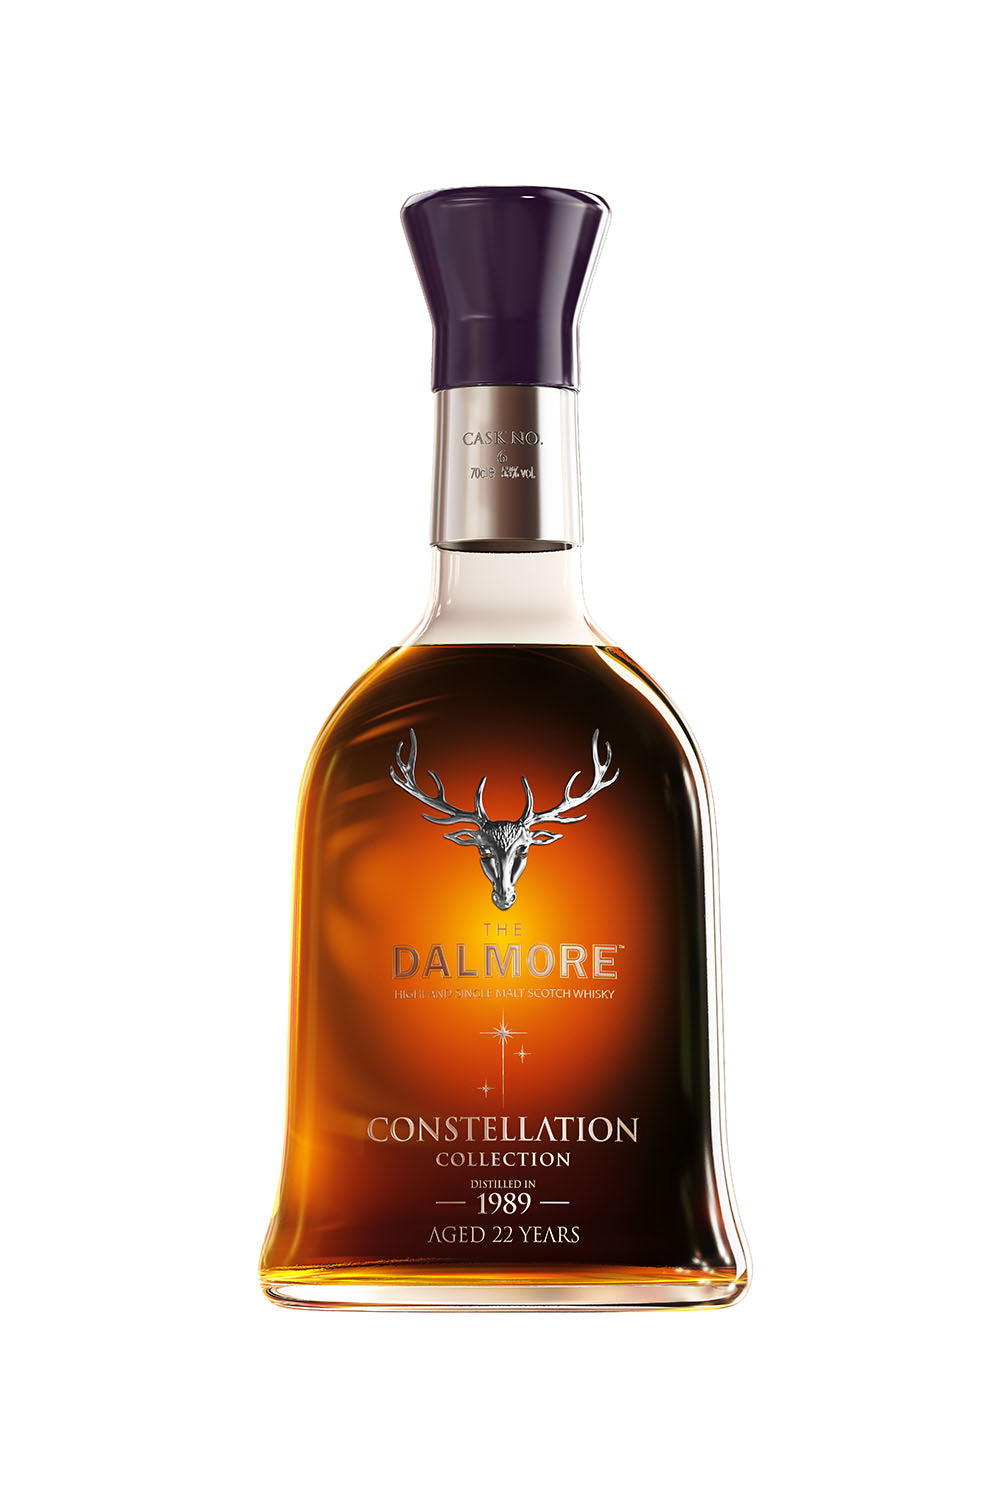 The Dalmore 1989 Constellation - Cask 6